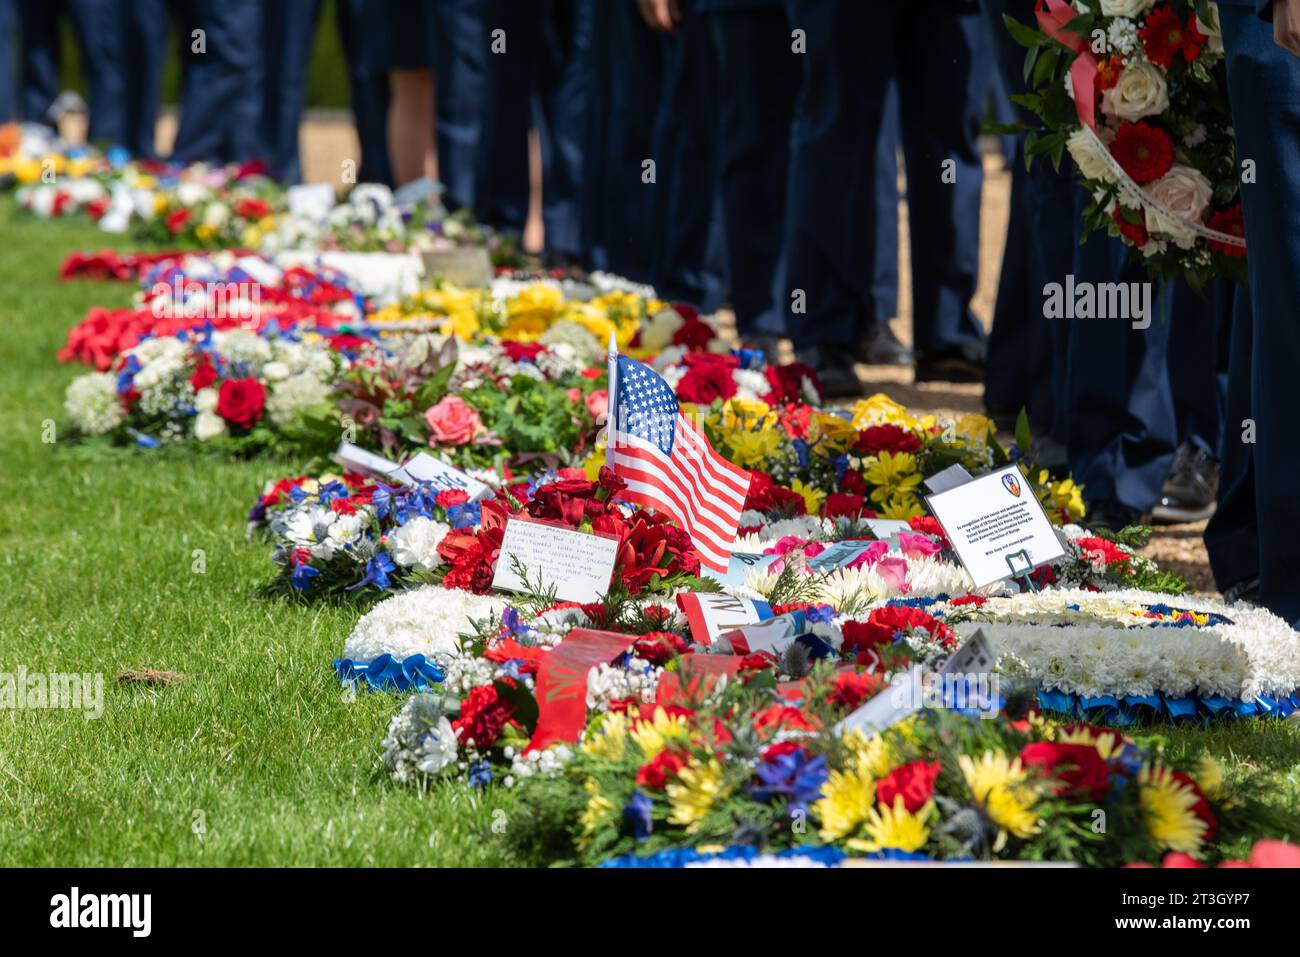 US service personnel with wreaths at US Memorial Day remembrance event at Cambridge American Cemetery and Memorial, Cambridgeshire, UK. Messages Stock Photo